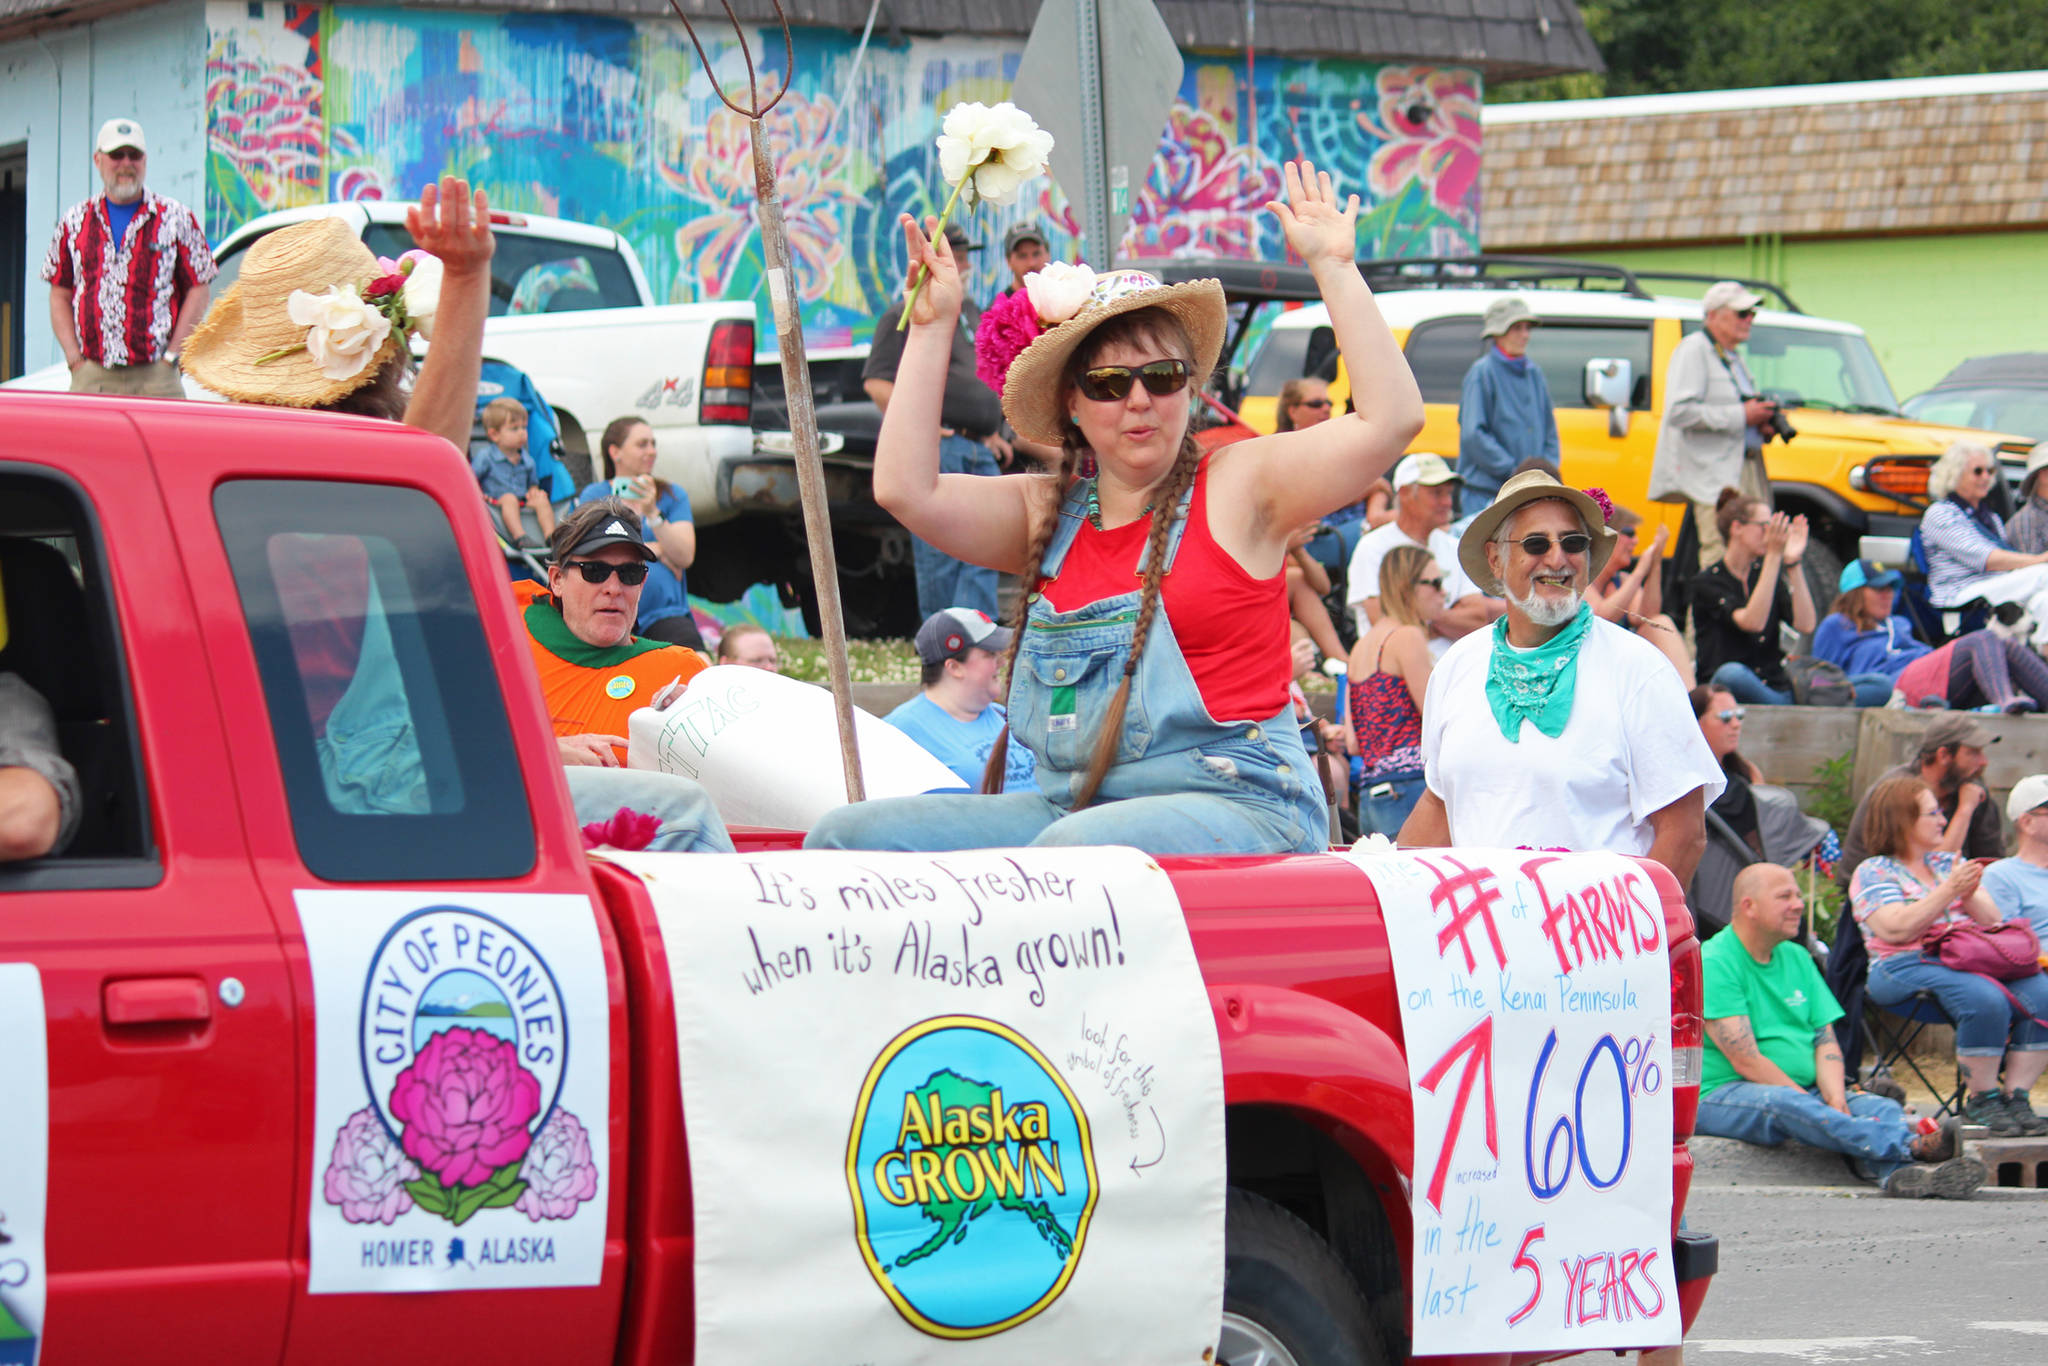 Homer Farmers Market Director Robbi Mixon celebrates on a float in this year’s July Fourth parade, hosted by the Homer Chamber of Commerce, on Thursday, July 4, 2019 on Pioneer Avenue in Homer, Alaska. (Photo by Megan Pacer/Homer News)